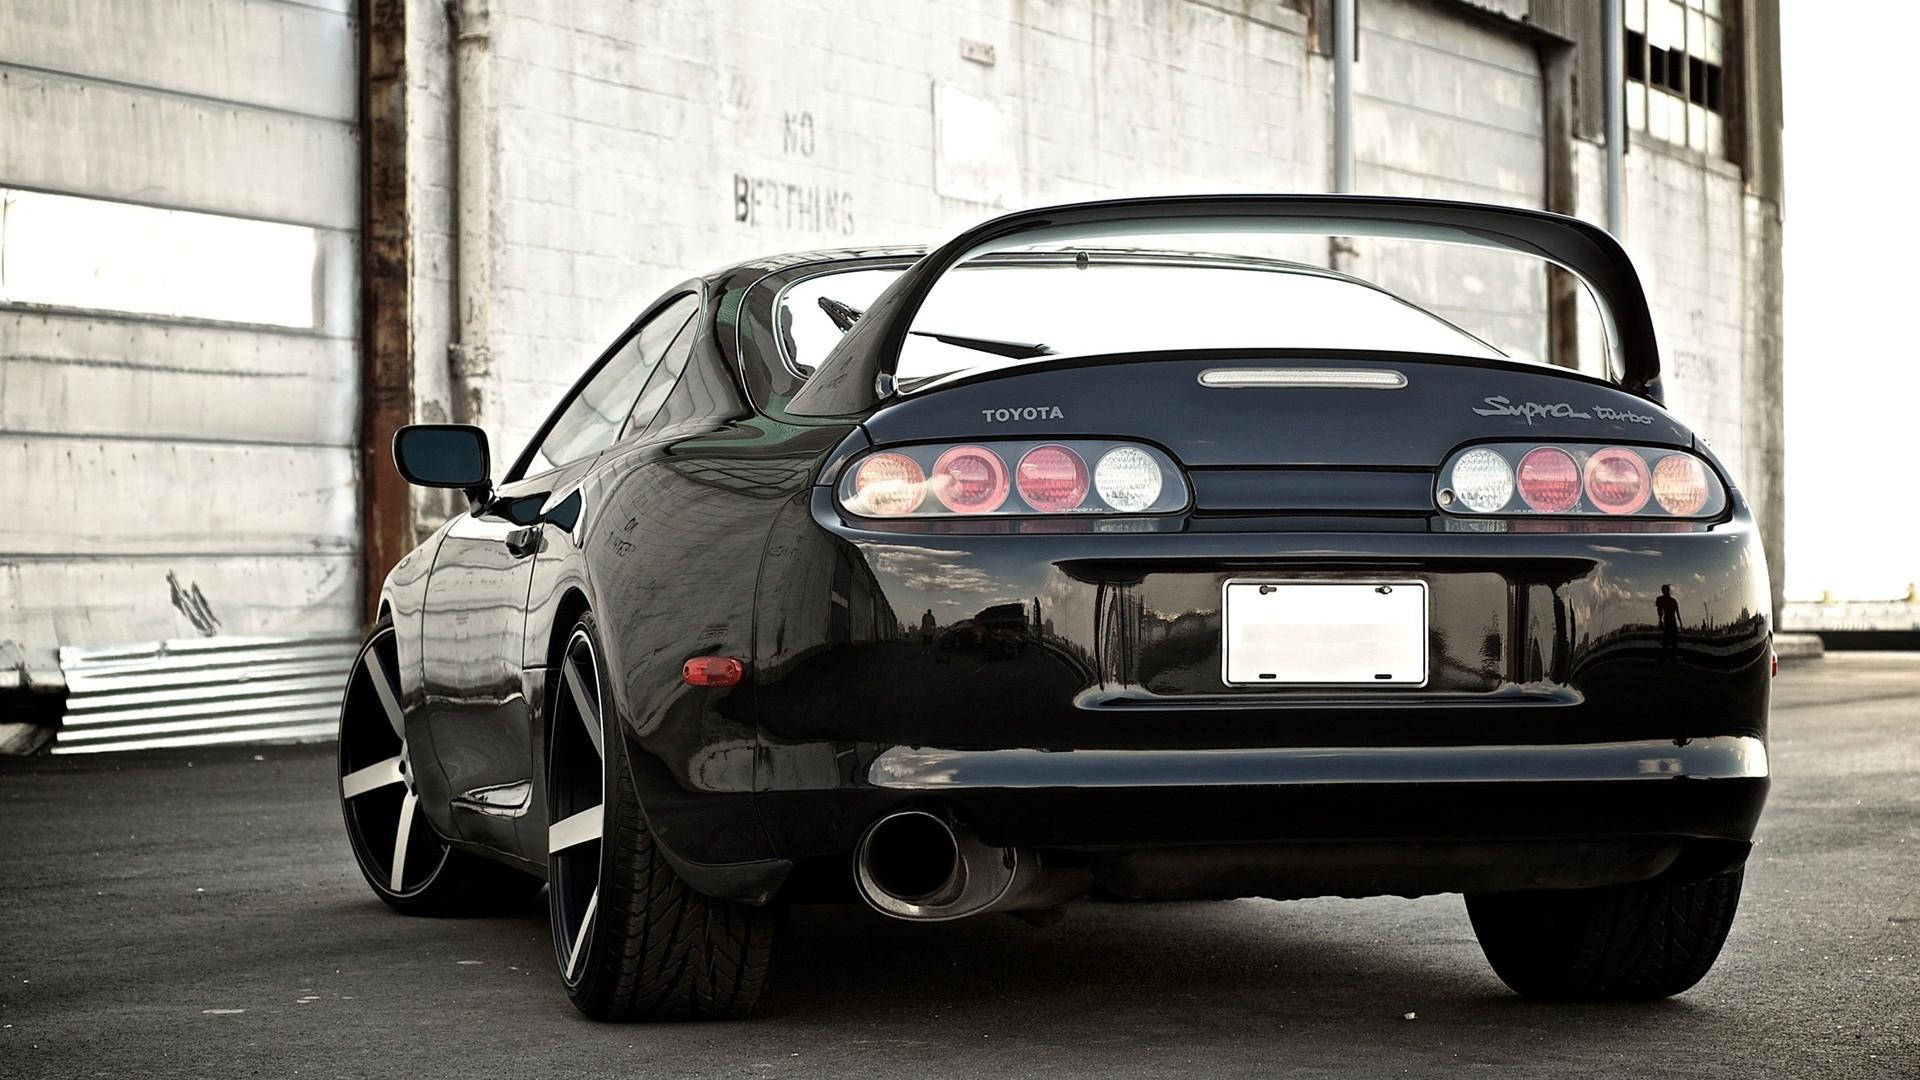 A Stunning Rear View Of The Black 1994 Toyota Supra Mk4